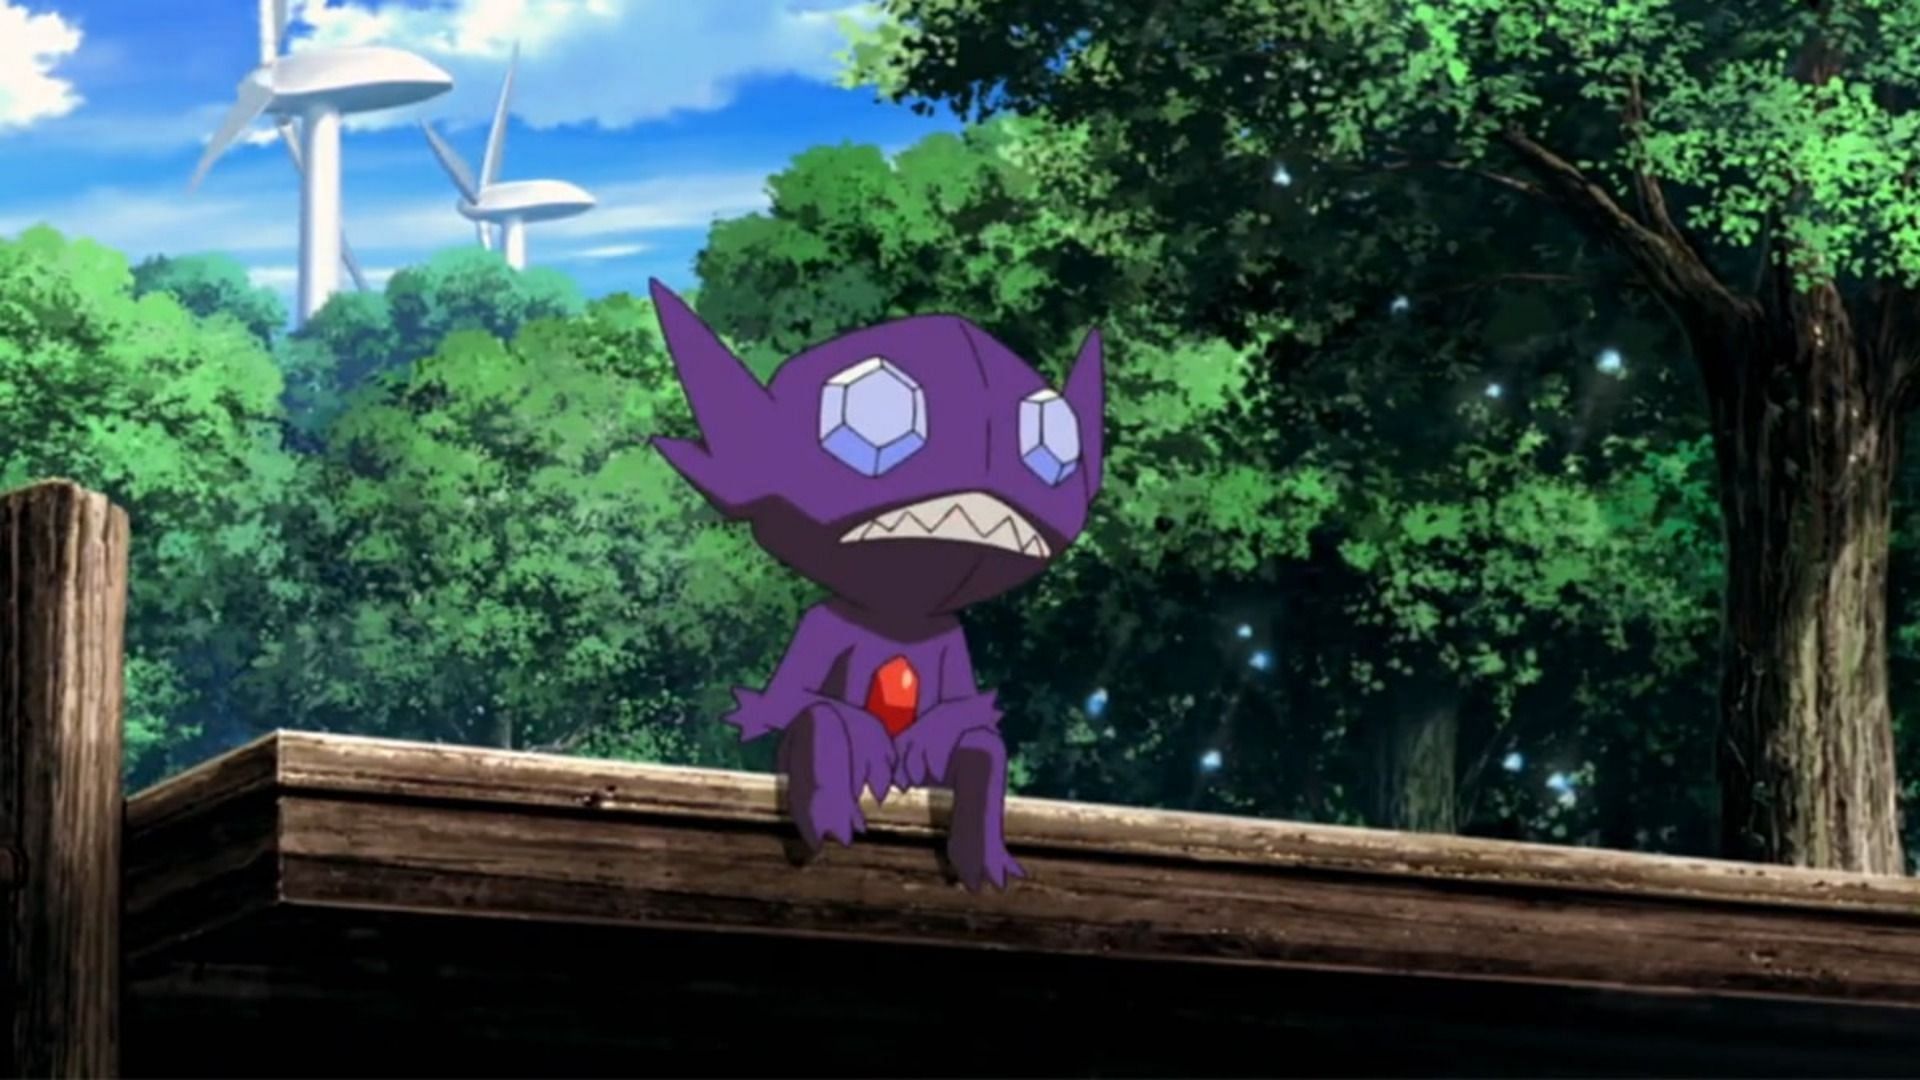 Sableye as it appears in the movie (Image via The Pokemon Company)